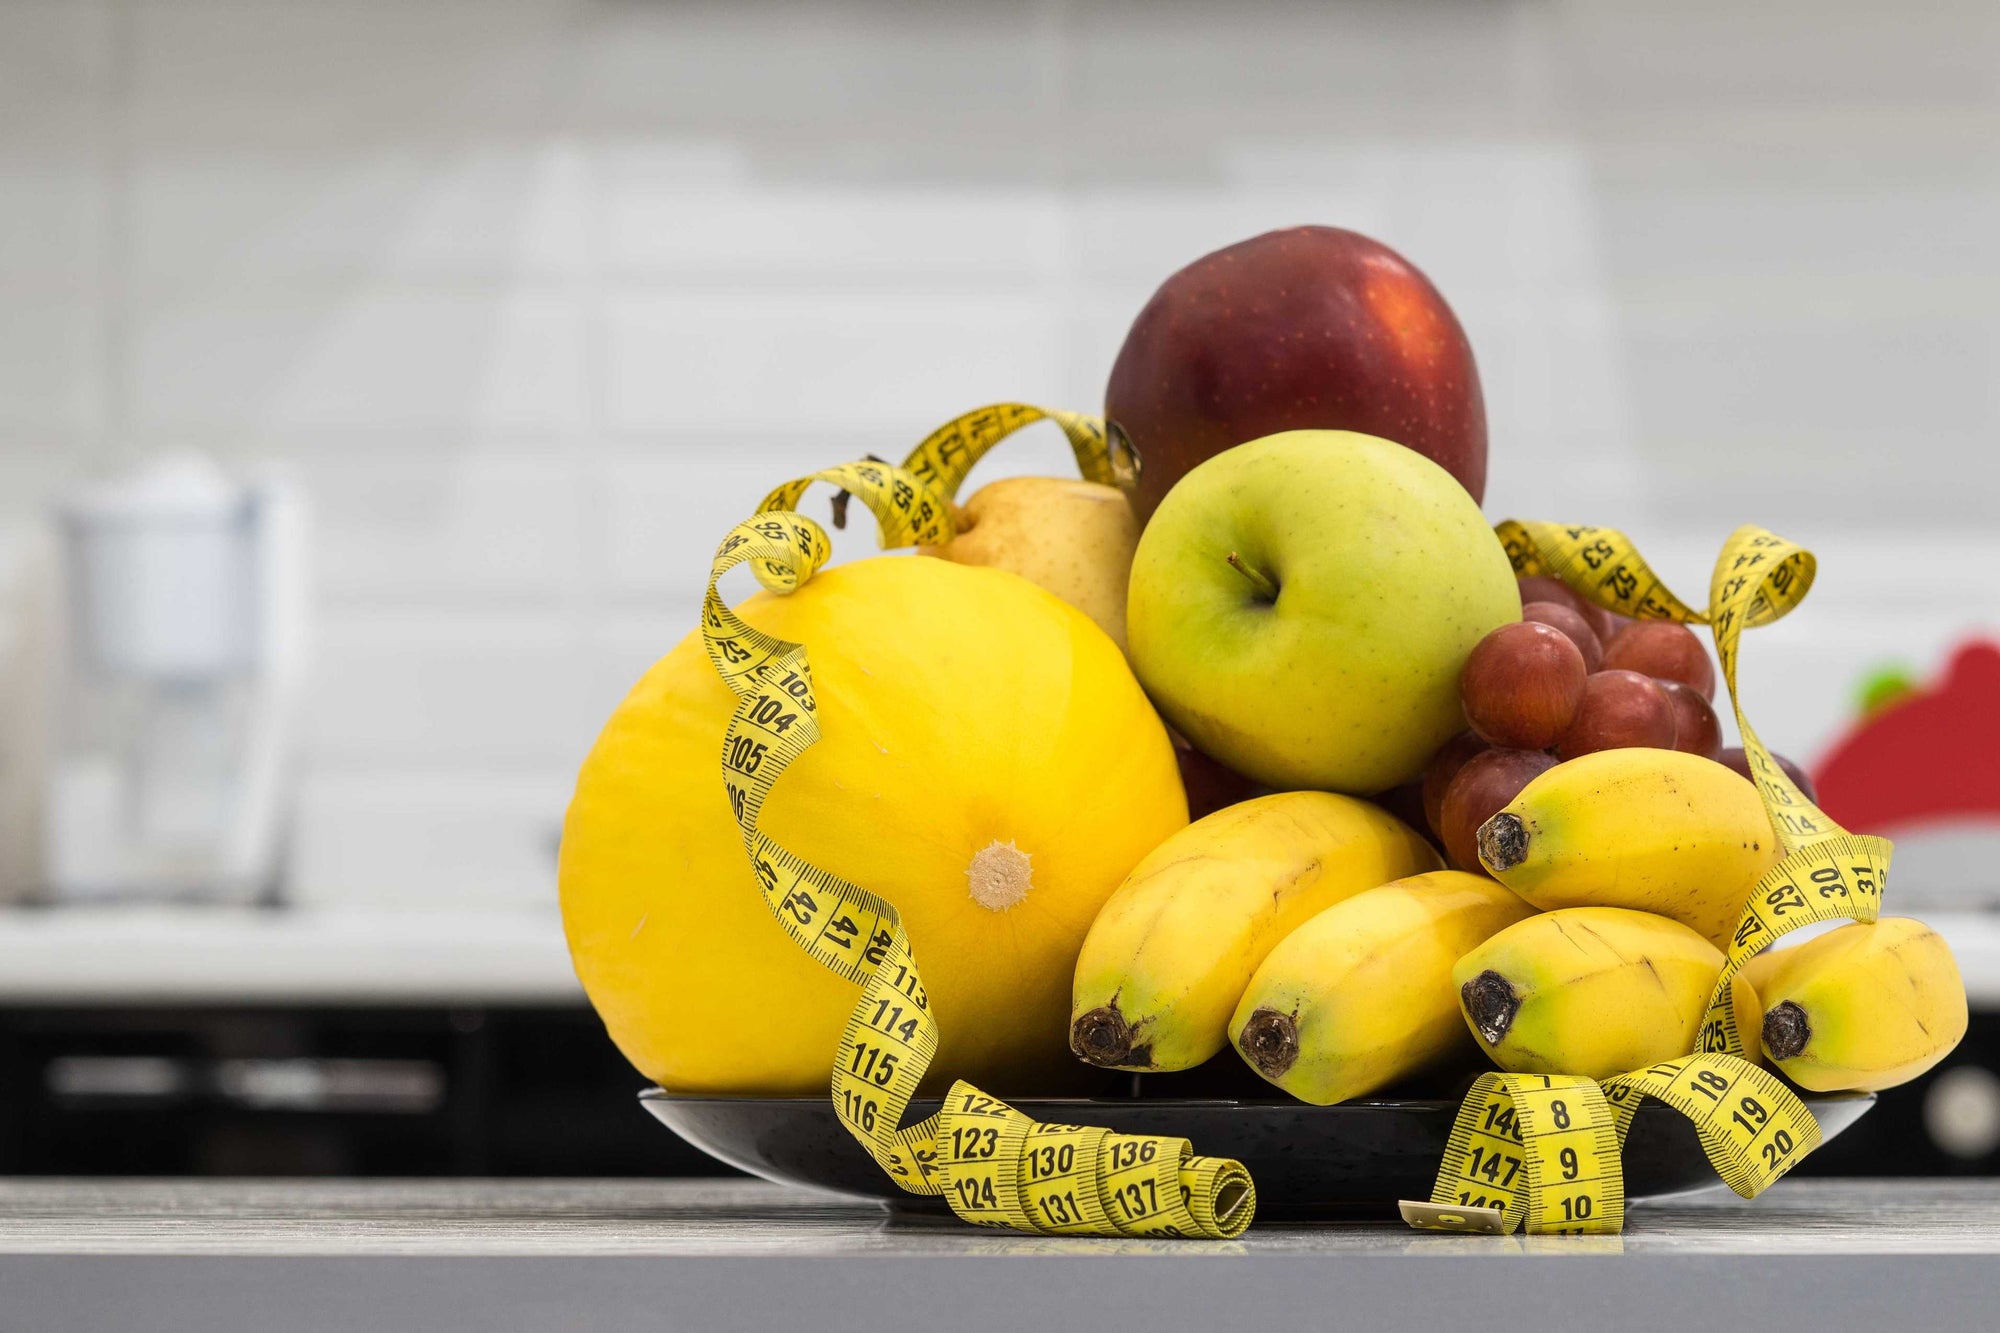 How Can Eating Fruit Help Me Lose Weight?